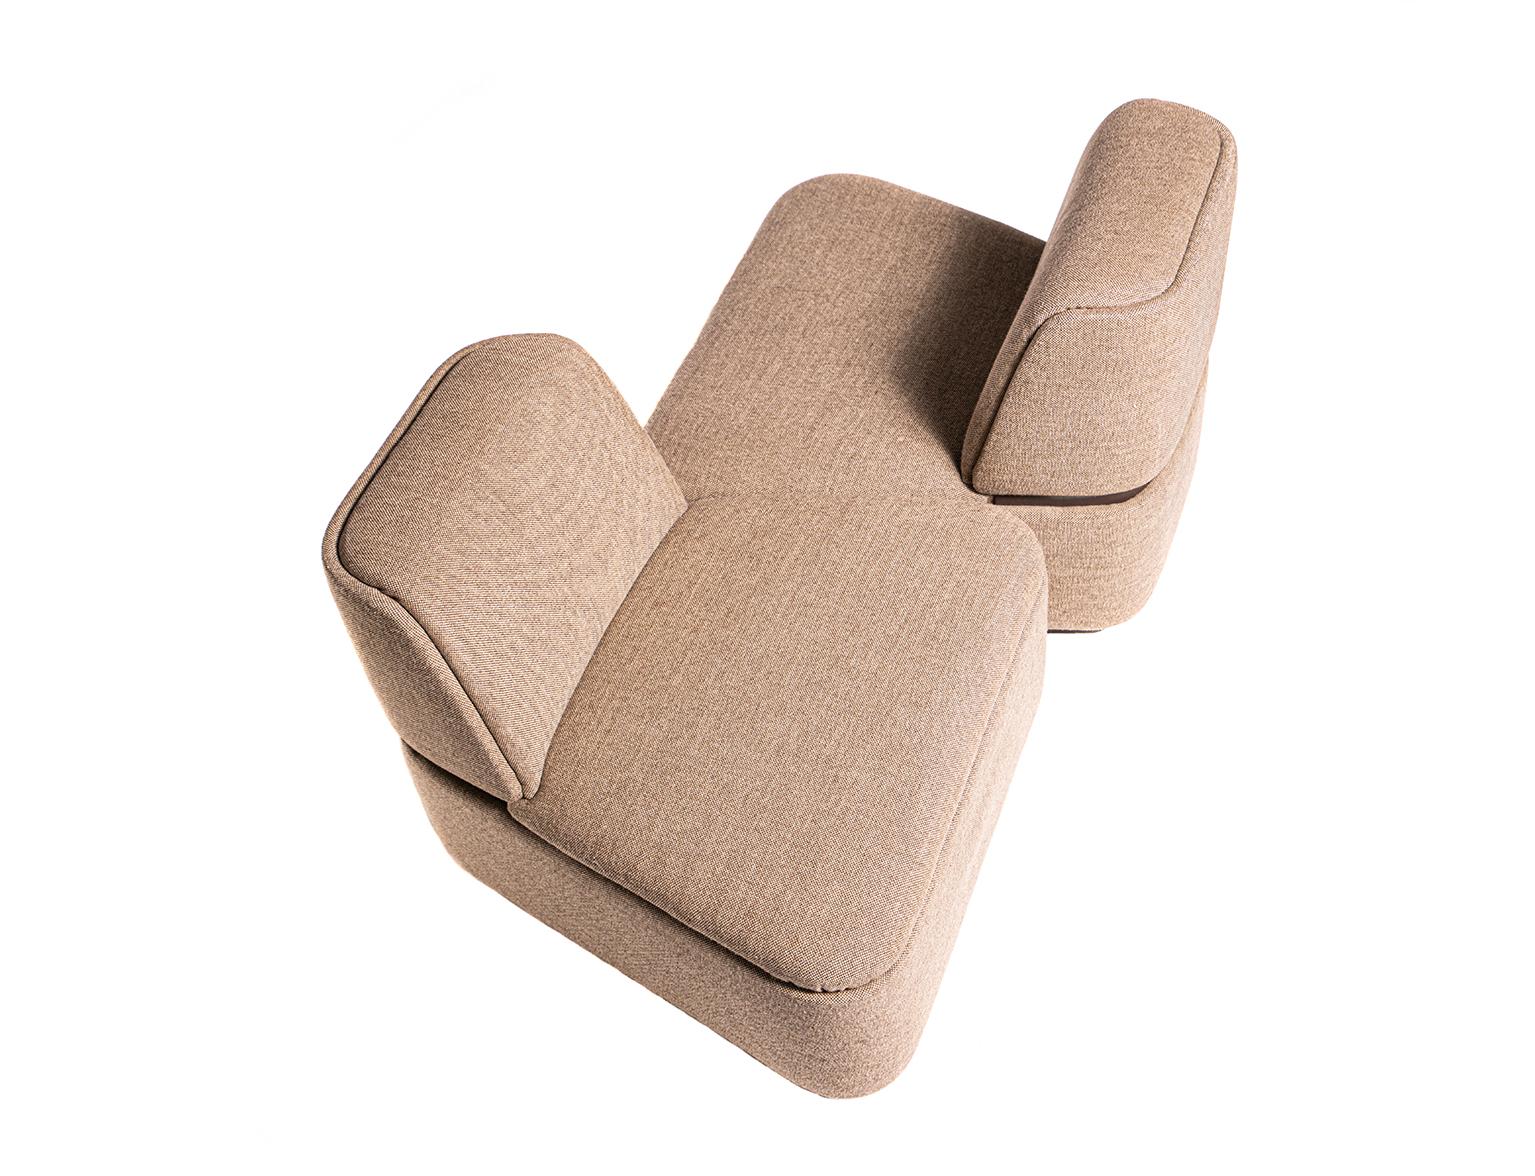 Movie stars - charismatic set of 3 lounge chairs.
Set of 3 lounge chairs in original light brown wool blend fabric. Acquired in Düsseldof from a reputable auction house that proposed the design to possibly be early Eams. Robust wooden structure 70s